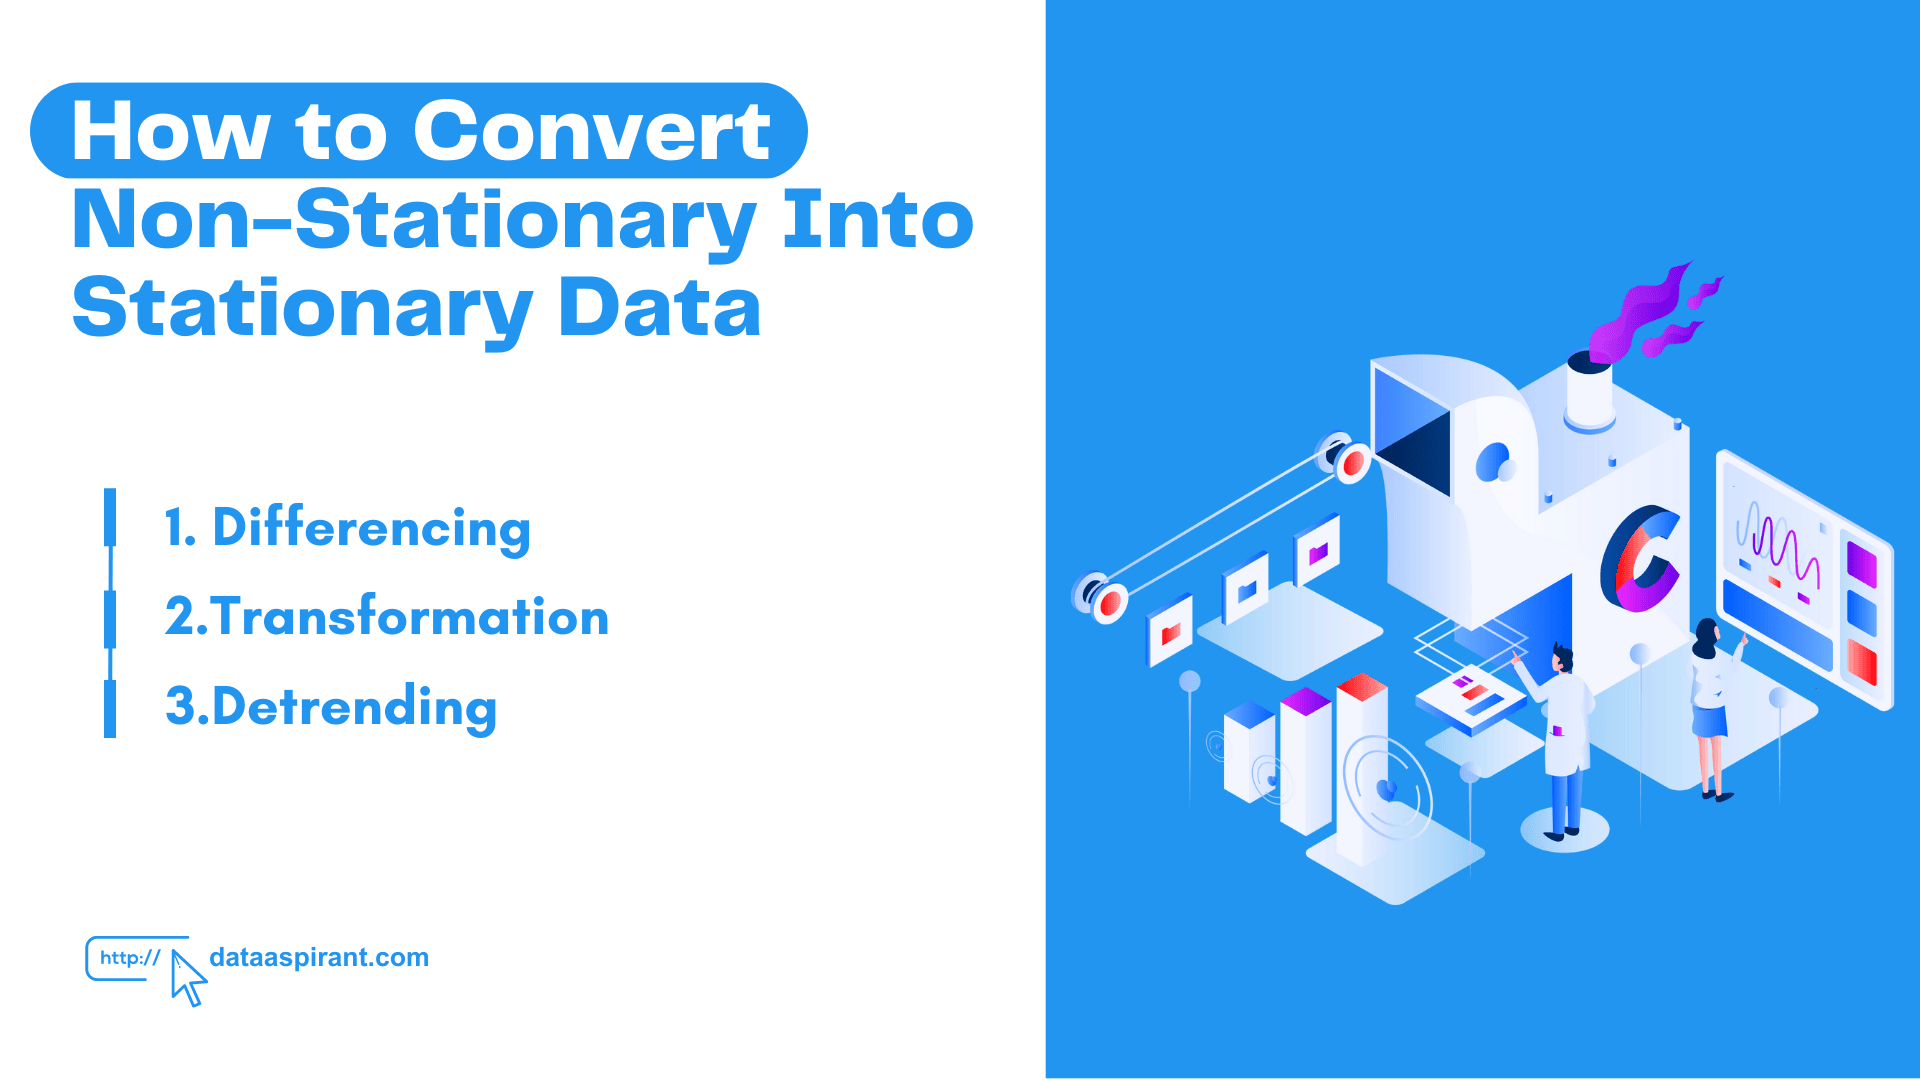 How to Convert Non-Stationary Into Stationary Data